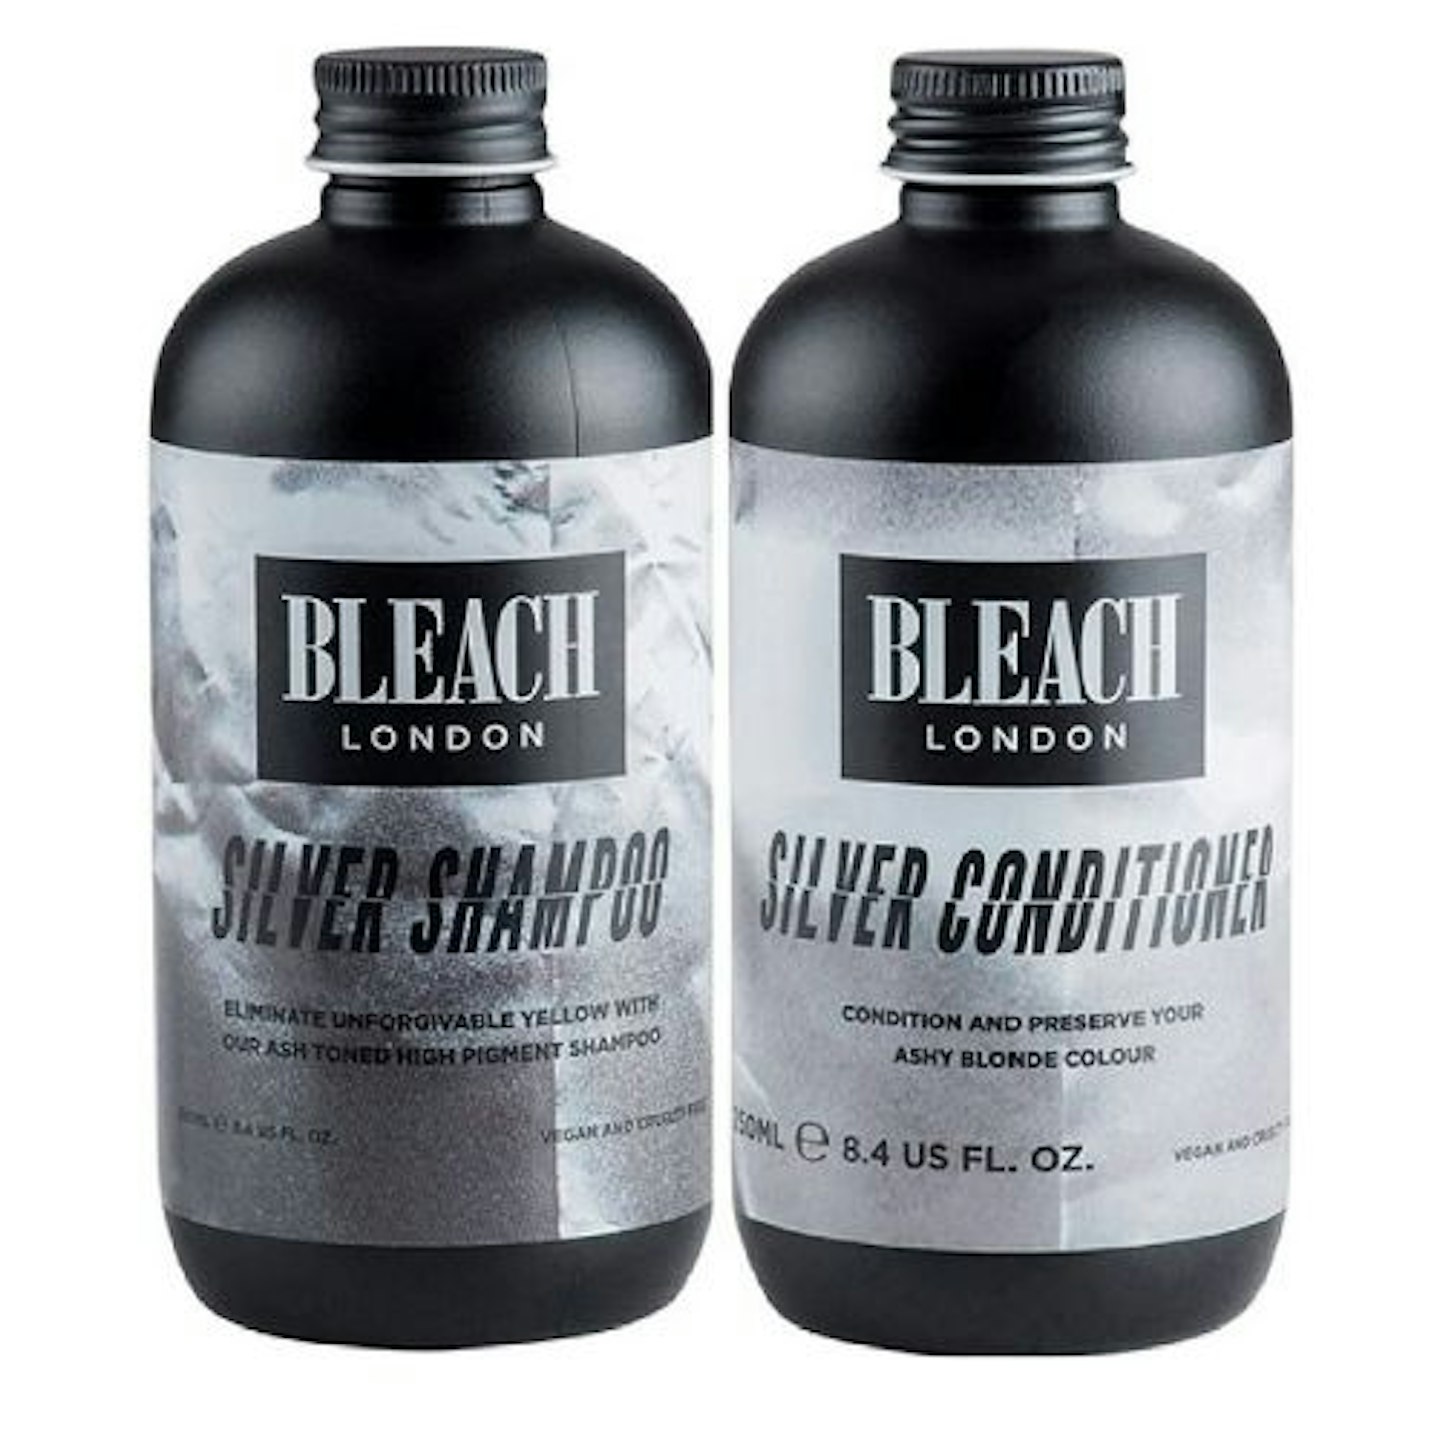 Bleach London Silver Shampoo and Conditioner